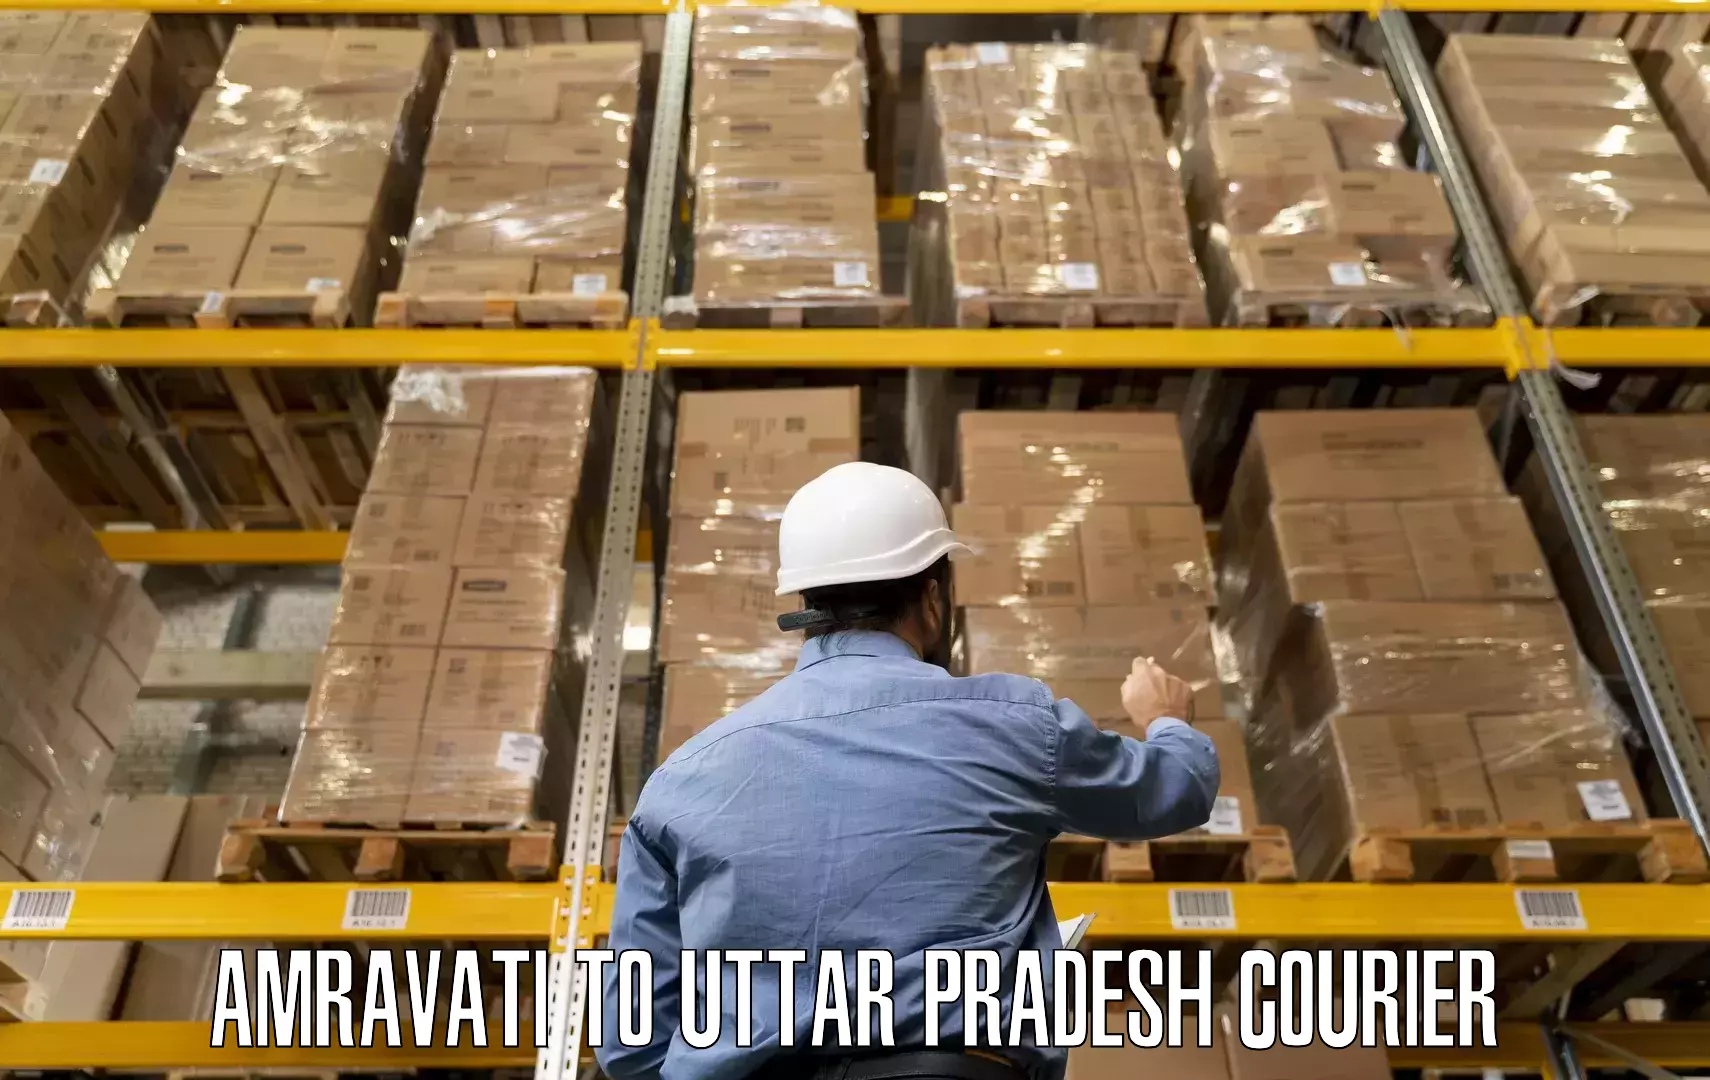 Furniture delivery service Amravati to IIIT Lucknow